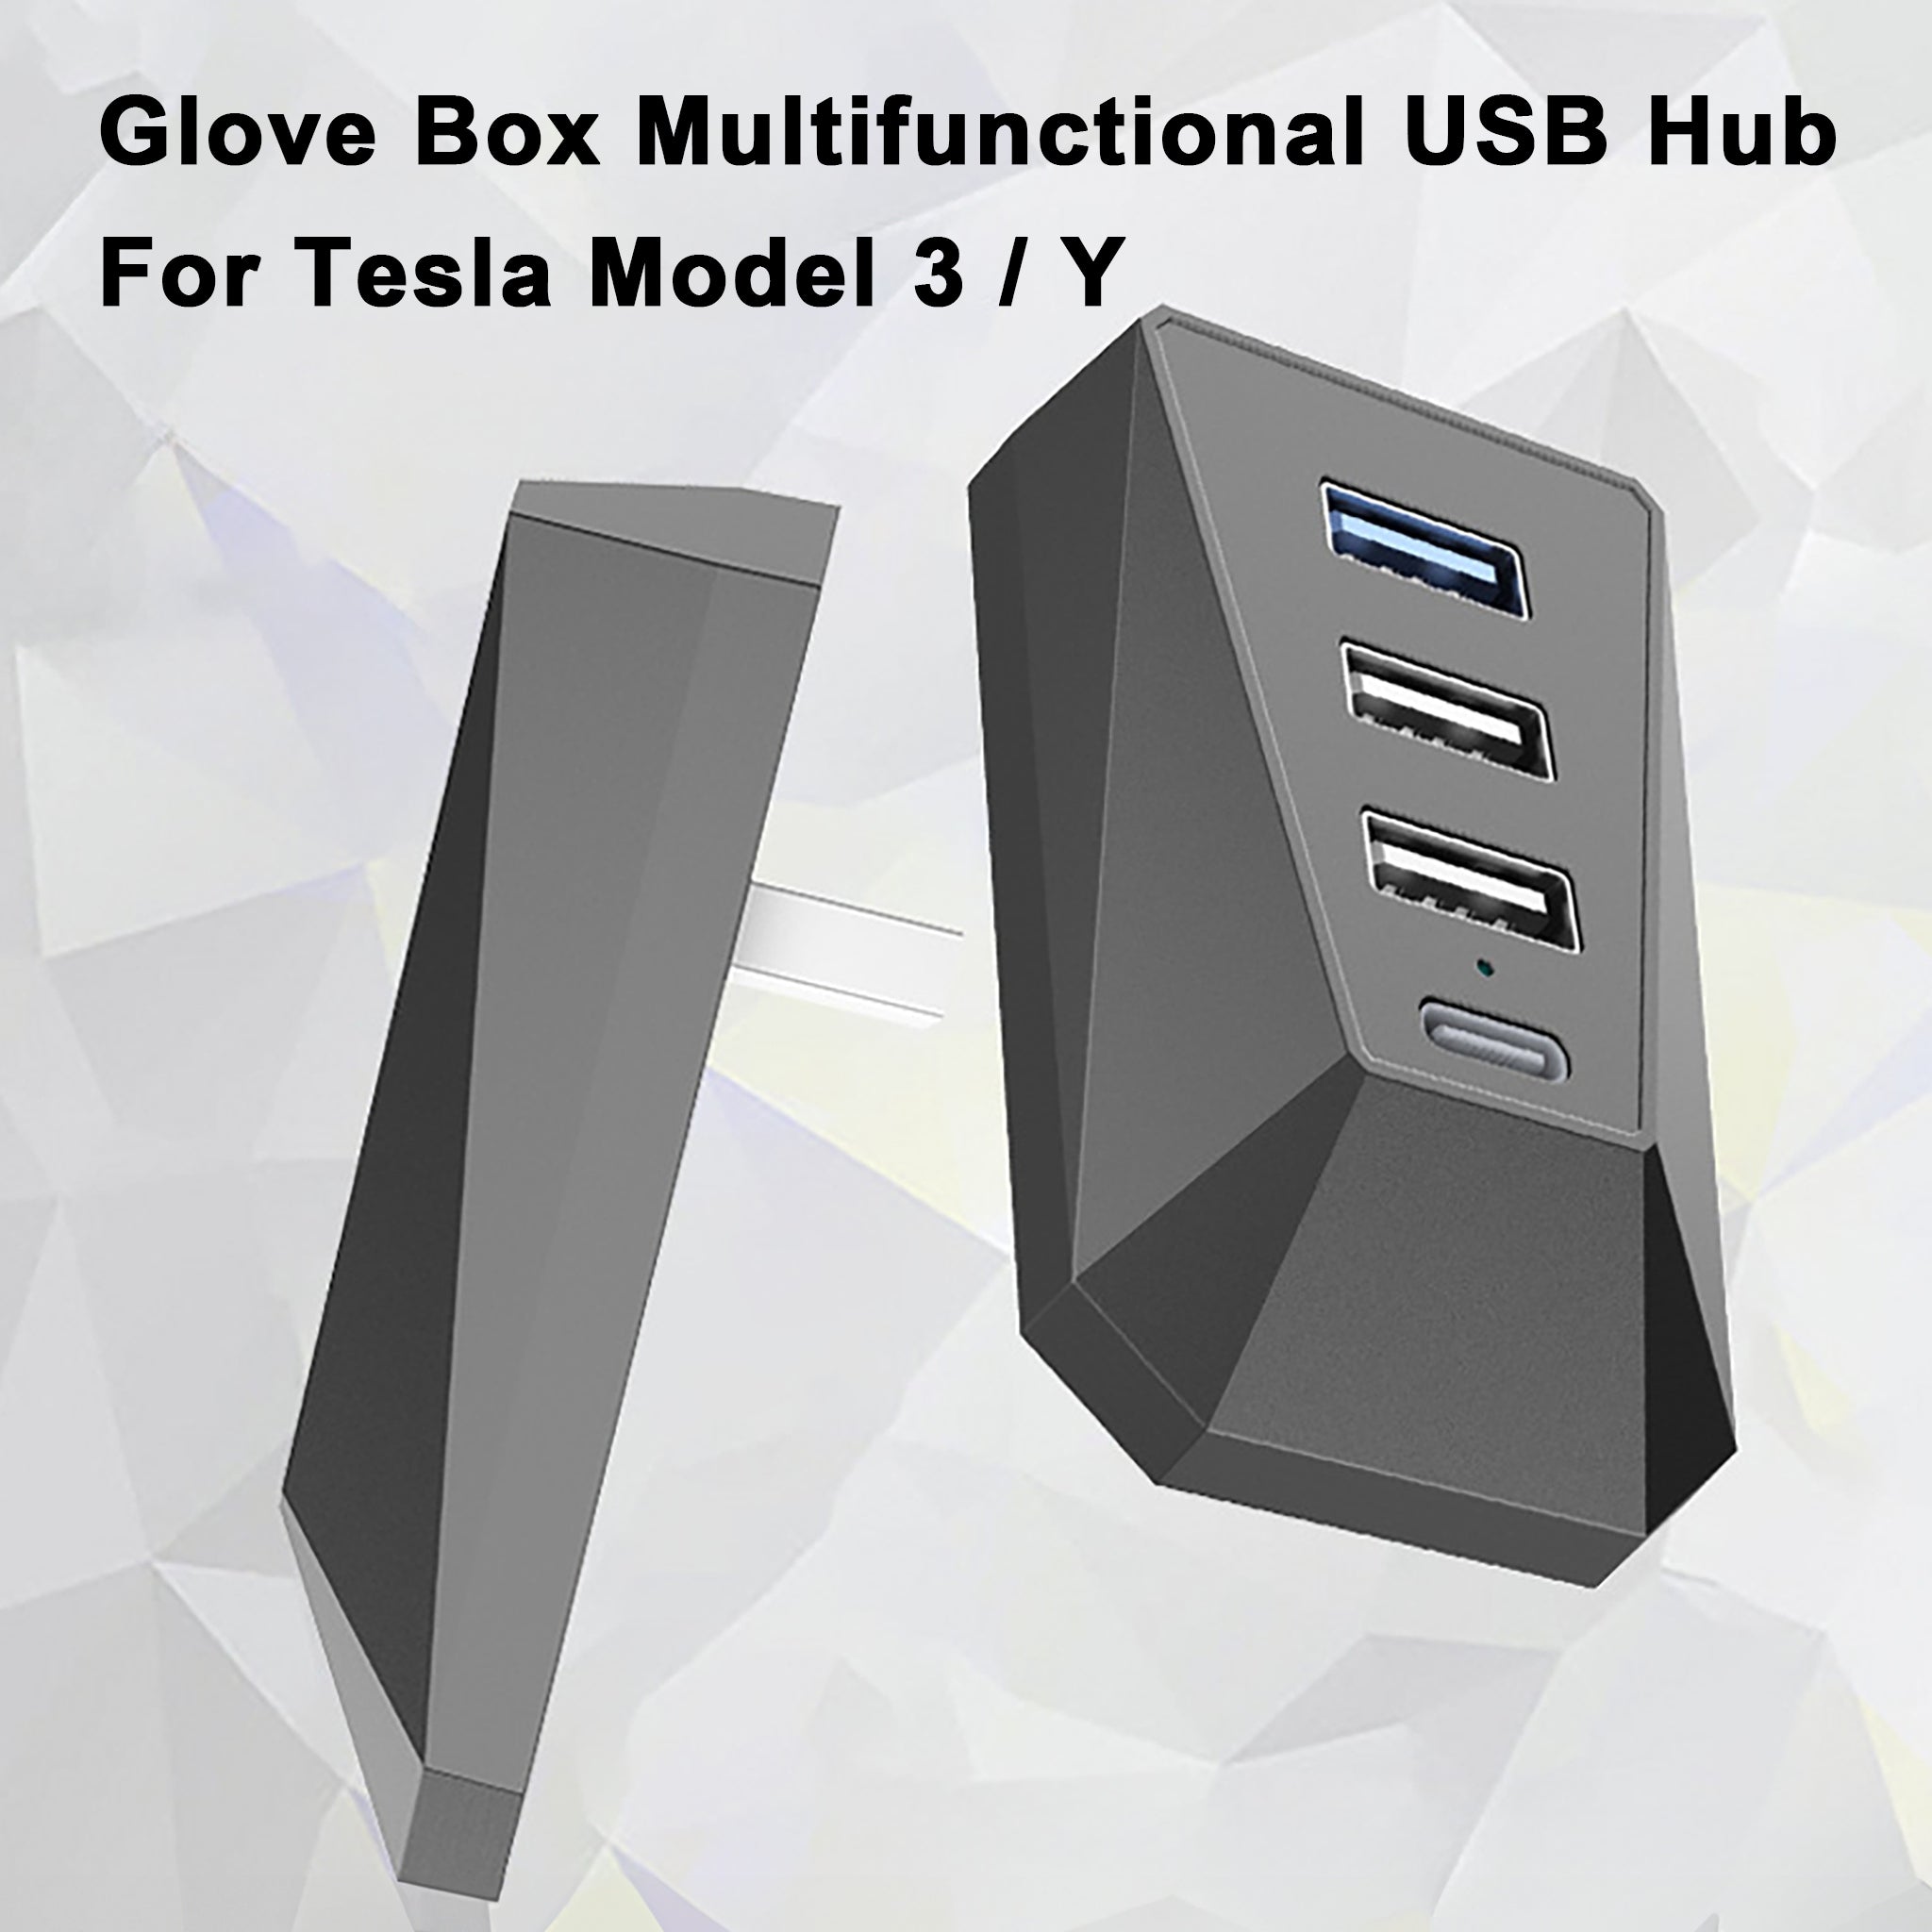 4in1 USB Hub Glove Box For Tesla 2021 Model 3 Y Docking Station Charger  Adapter